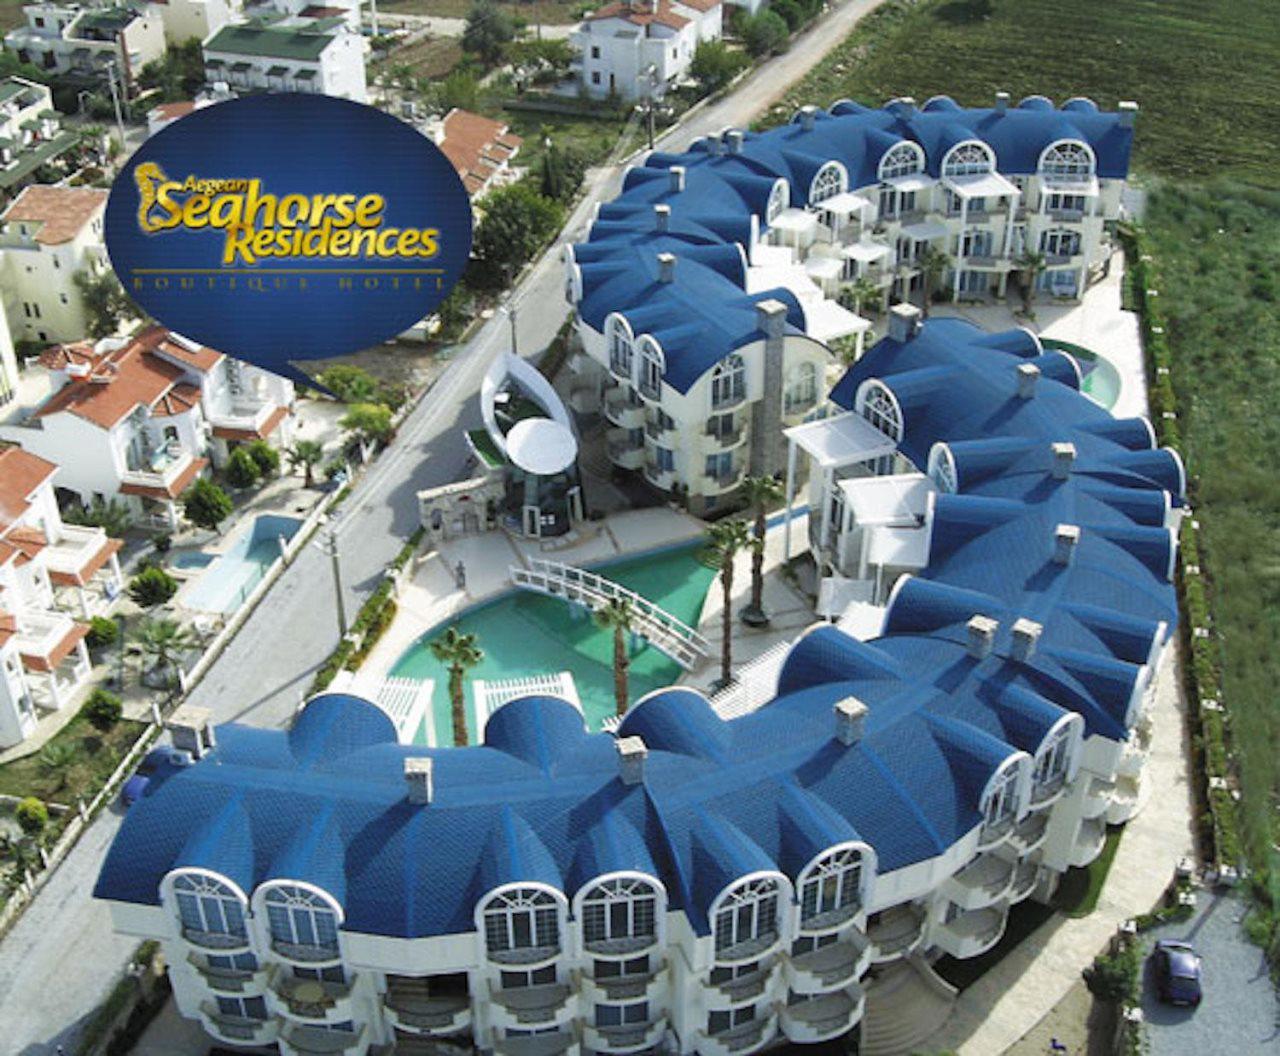 Seahorse Deluxe & Residences